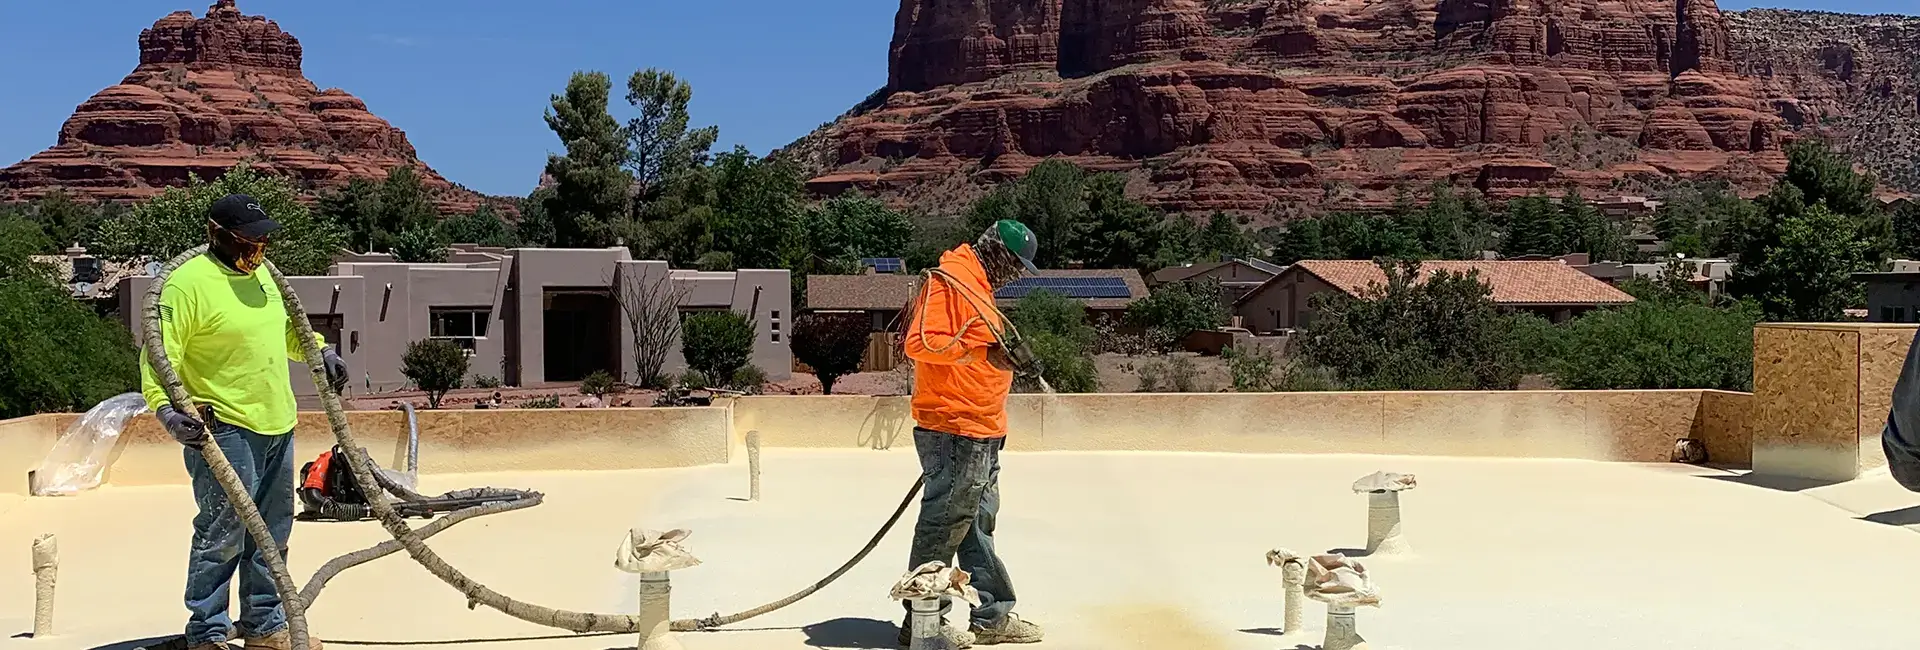 Residential-Roofing-in-Sedona-AZ-Go-To-Services